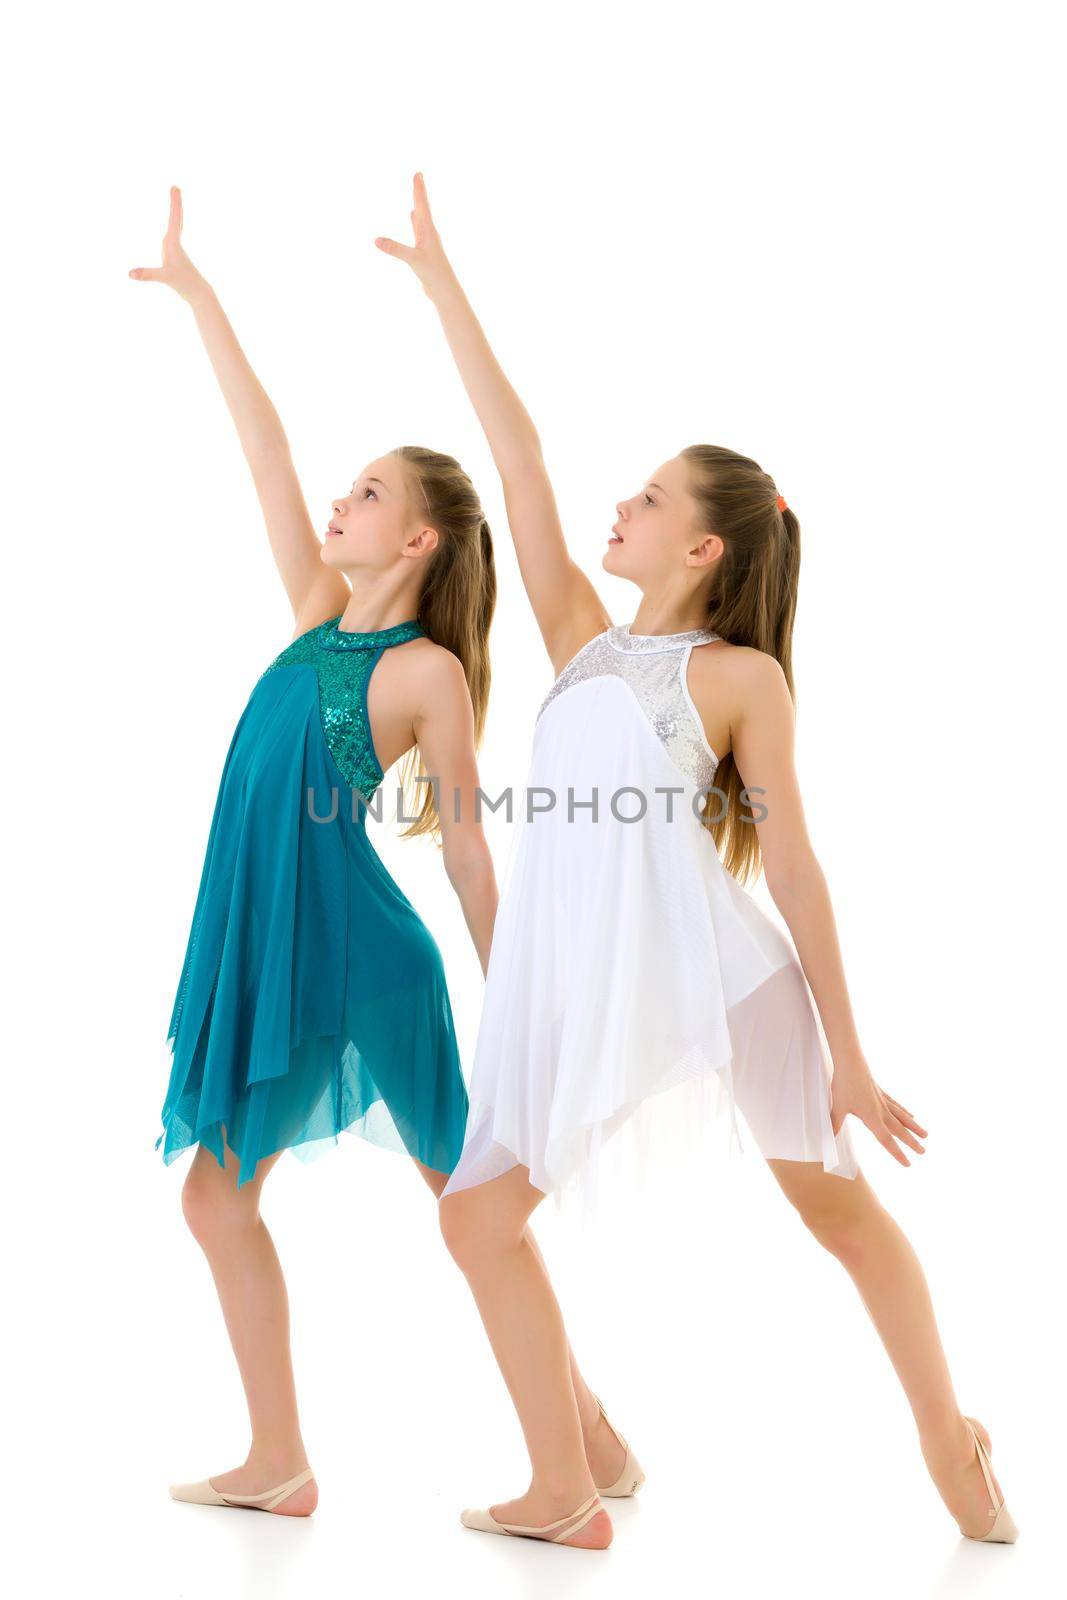 Two Twin Sisters in White and Blue Sport Dresses Dancing Togethe by kolesnikov_studio